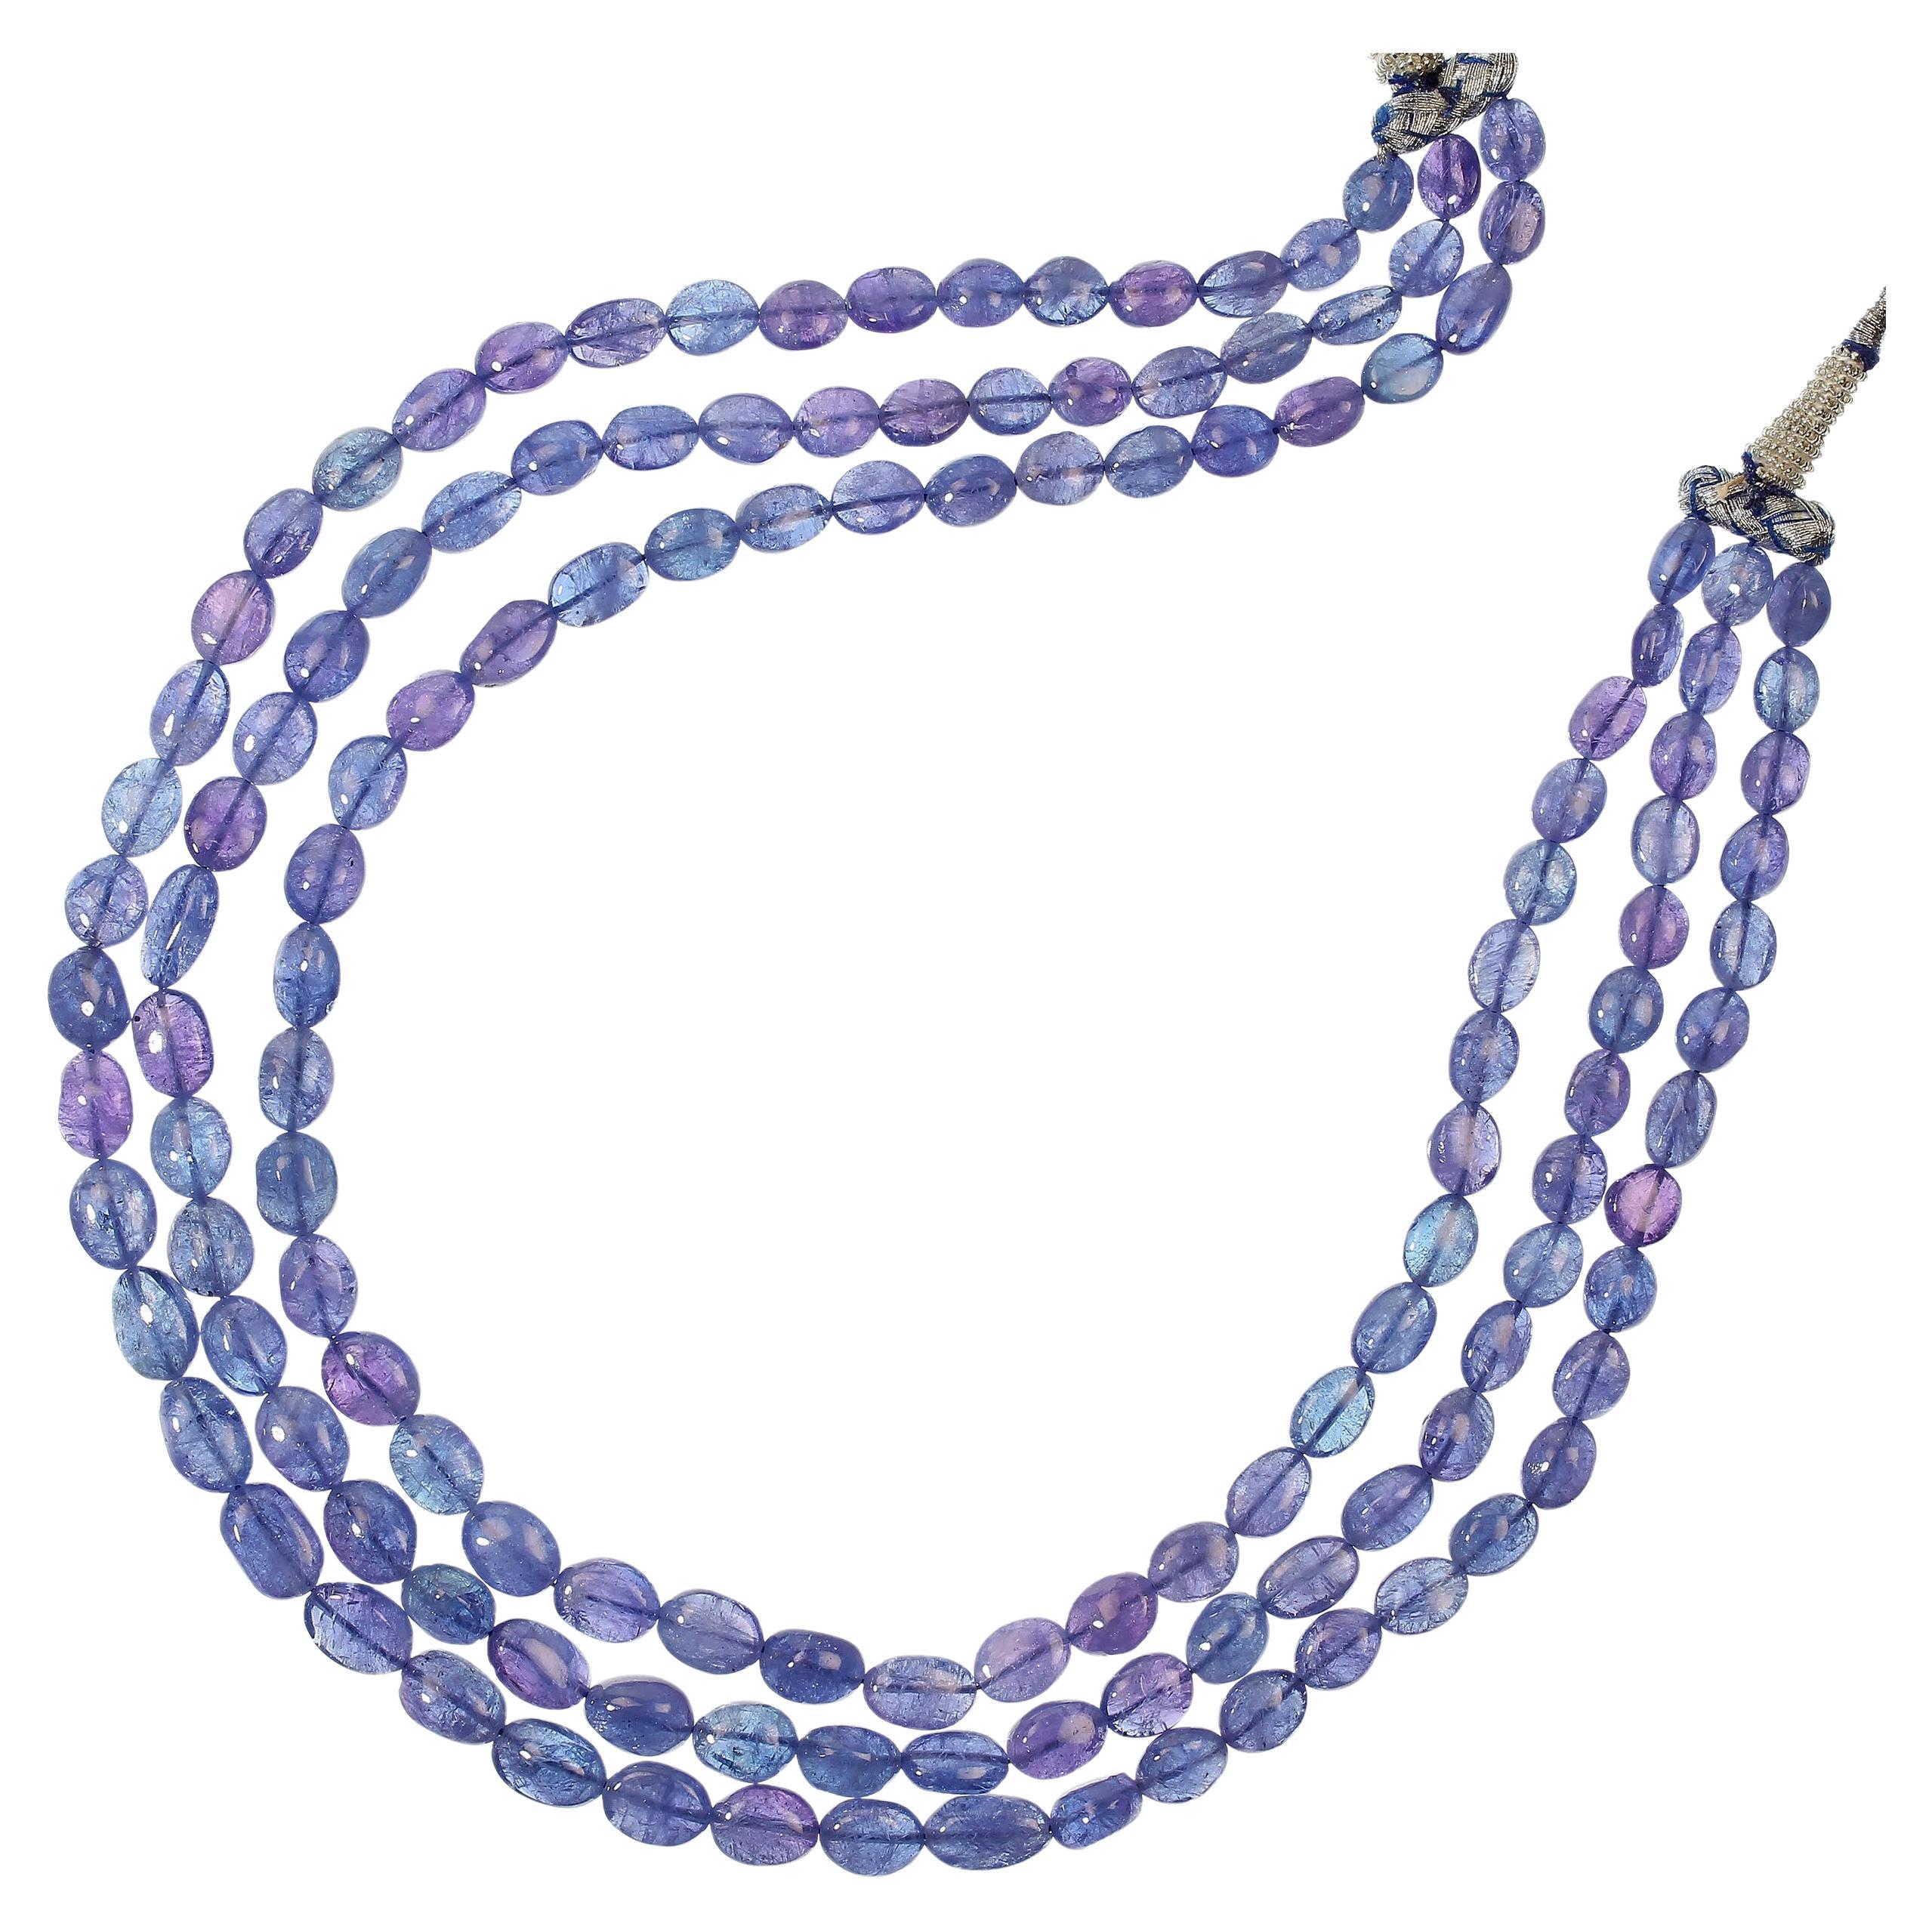 Beautiful three strand necklace of smooth Tanzanites.  These gently graduating tanzanites range approximately from 8 x 6 MM to 12 x 8 MM.  The gemstones are 18 inches and the silver and blue rope expands another 12 inche to slip the necklace over